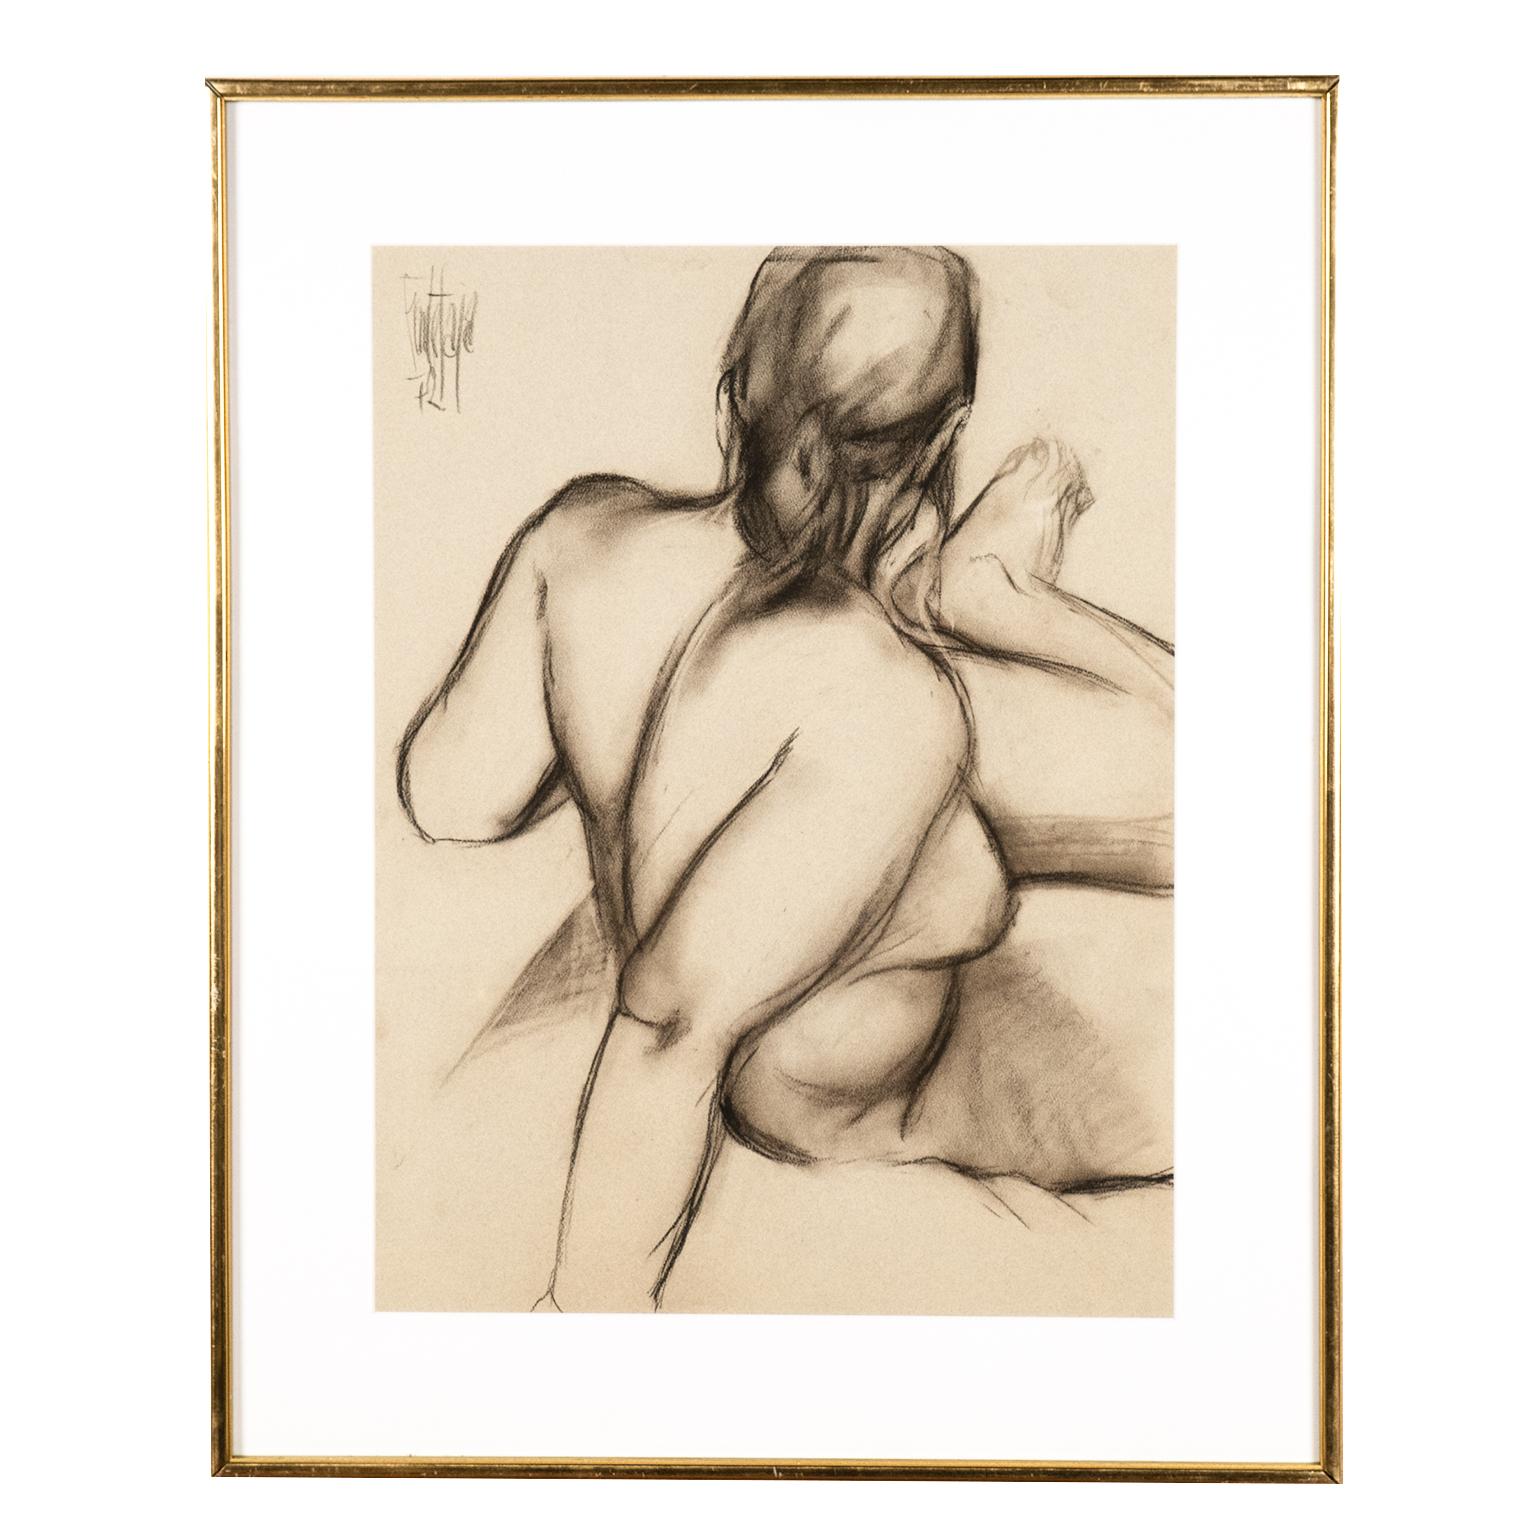 A quiet sophisticated pair of charcoal drawings of a reclining nude woman by Spanish born (1951) artist José Luis Fuentetaja. They are framed in original brass detailed frames with a new white mat board. 
Good scale and ready to hang.